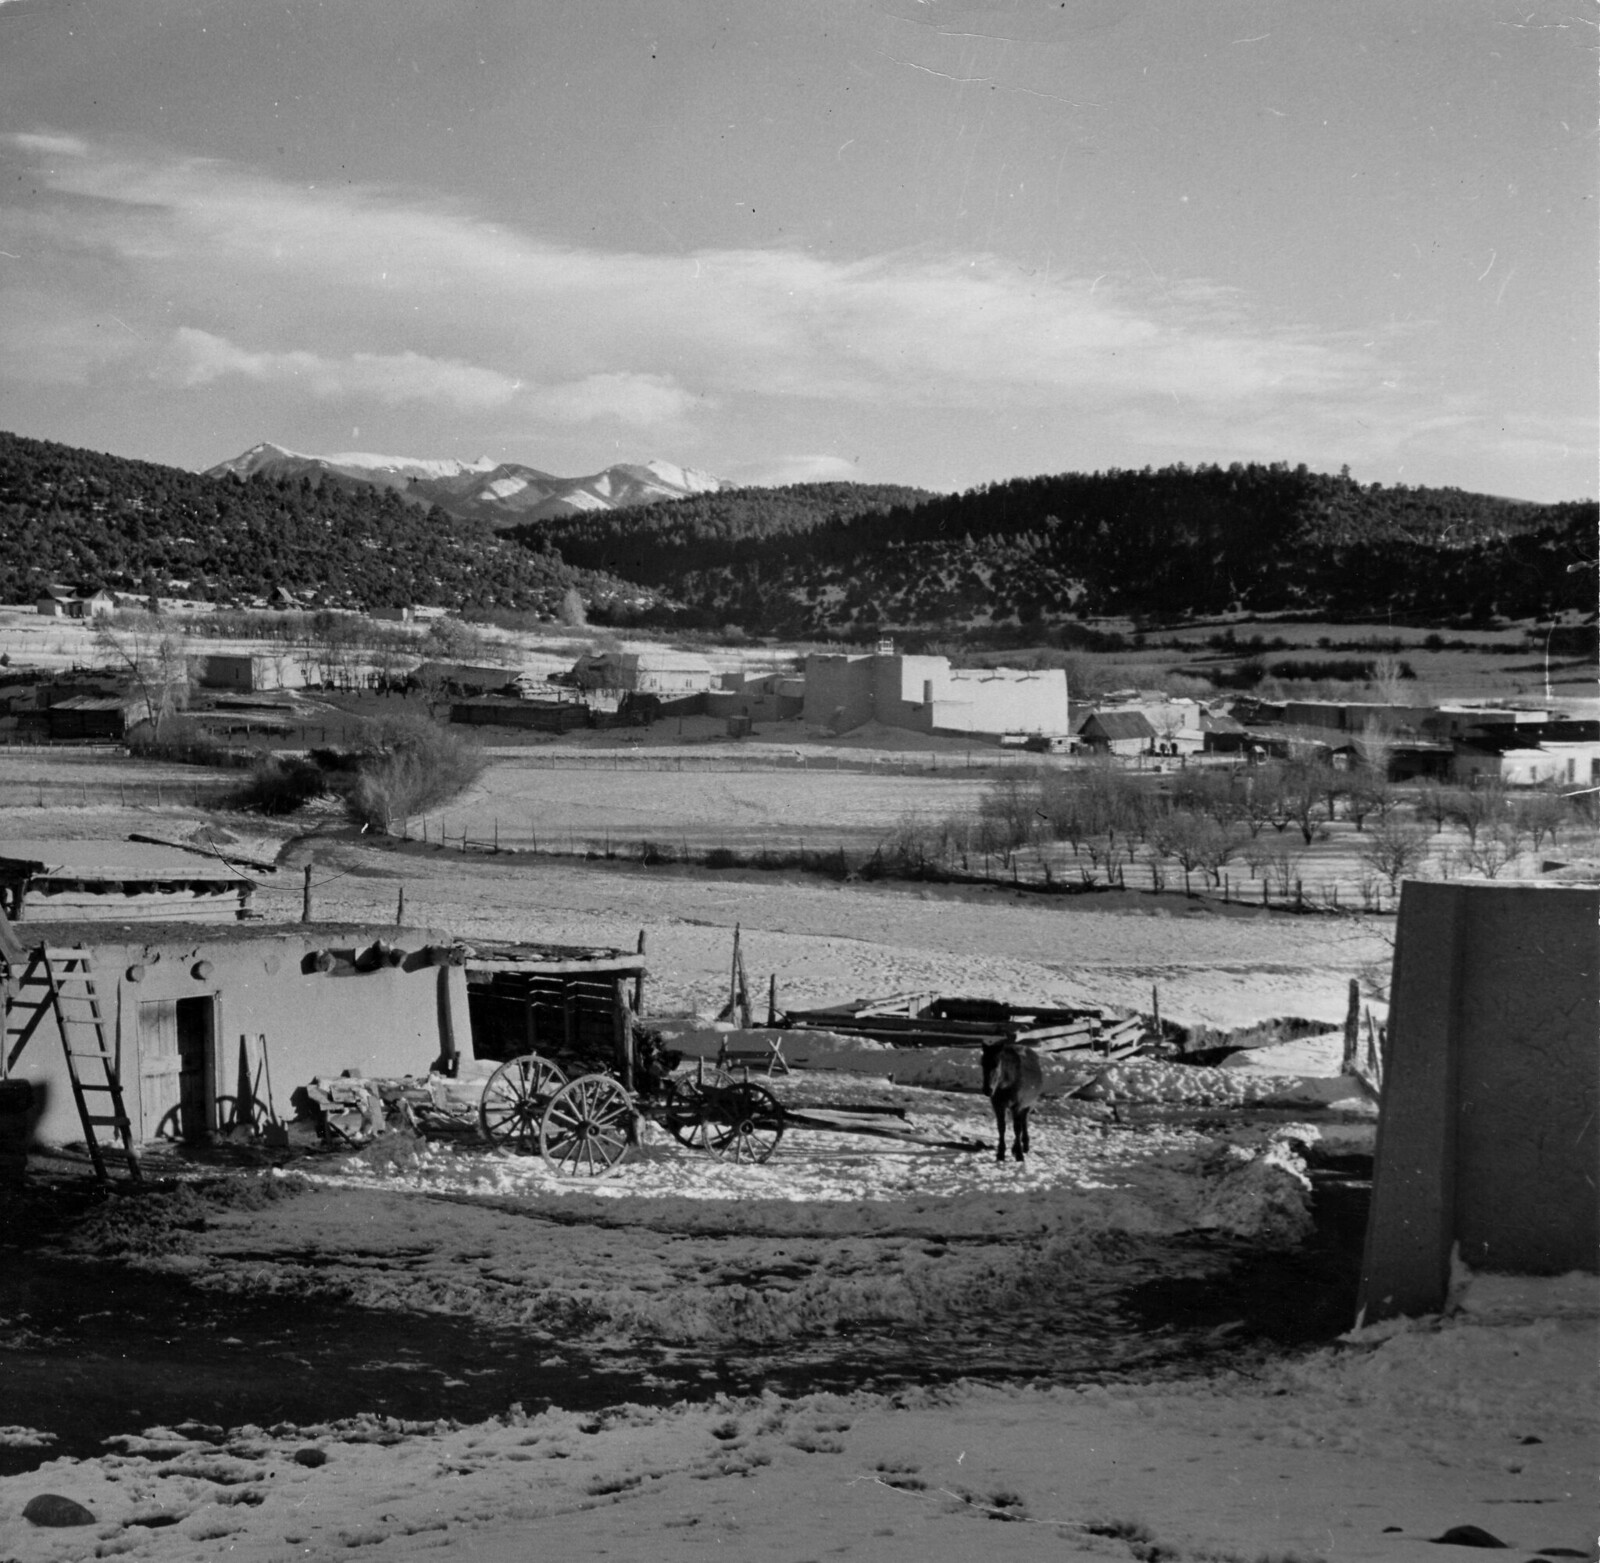 Hispanic village in the foothills of the Sangre de Cristo Mountains